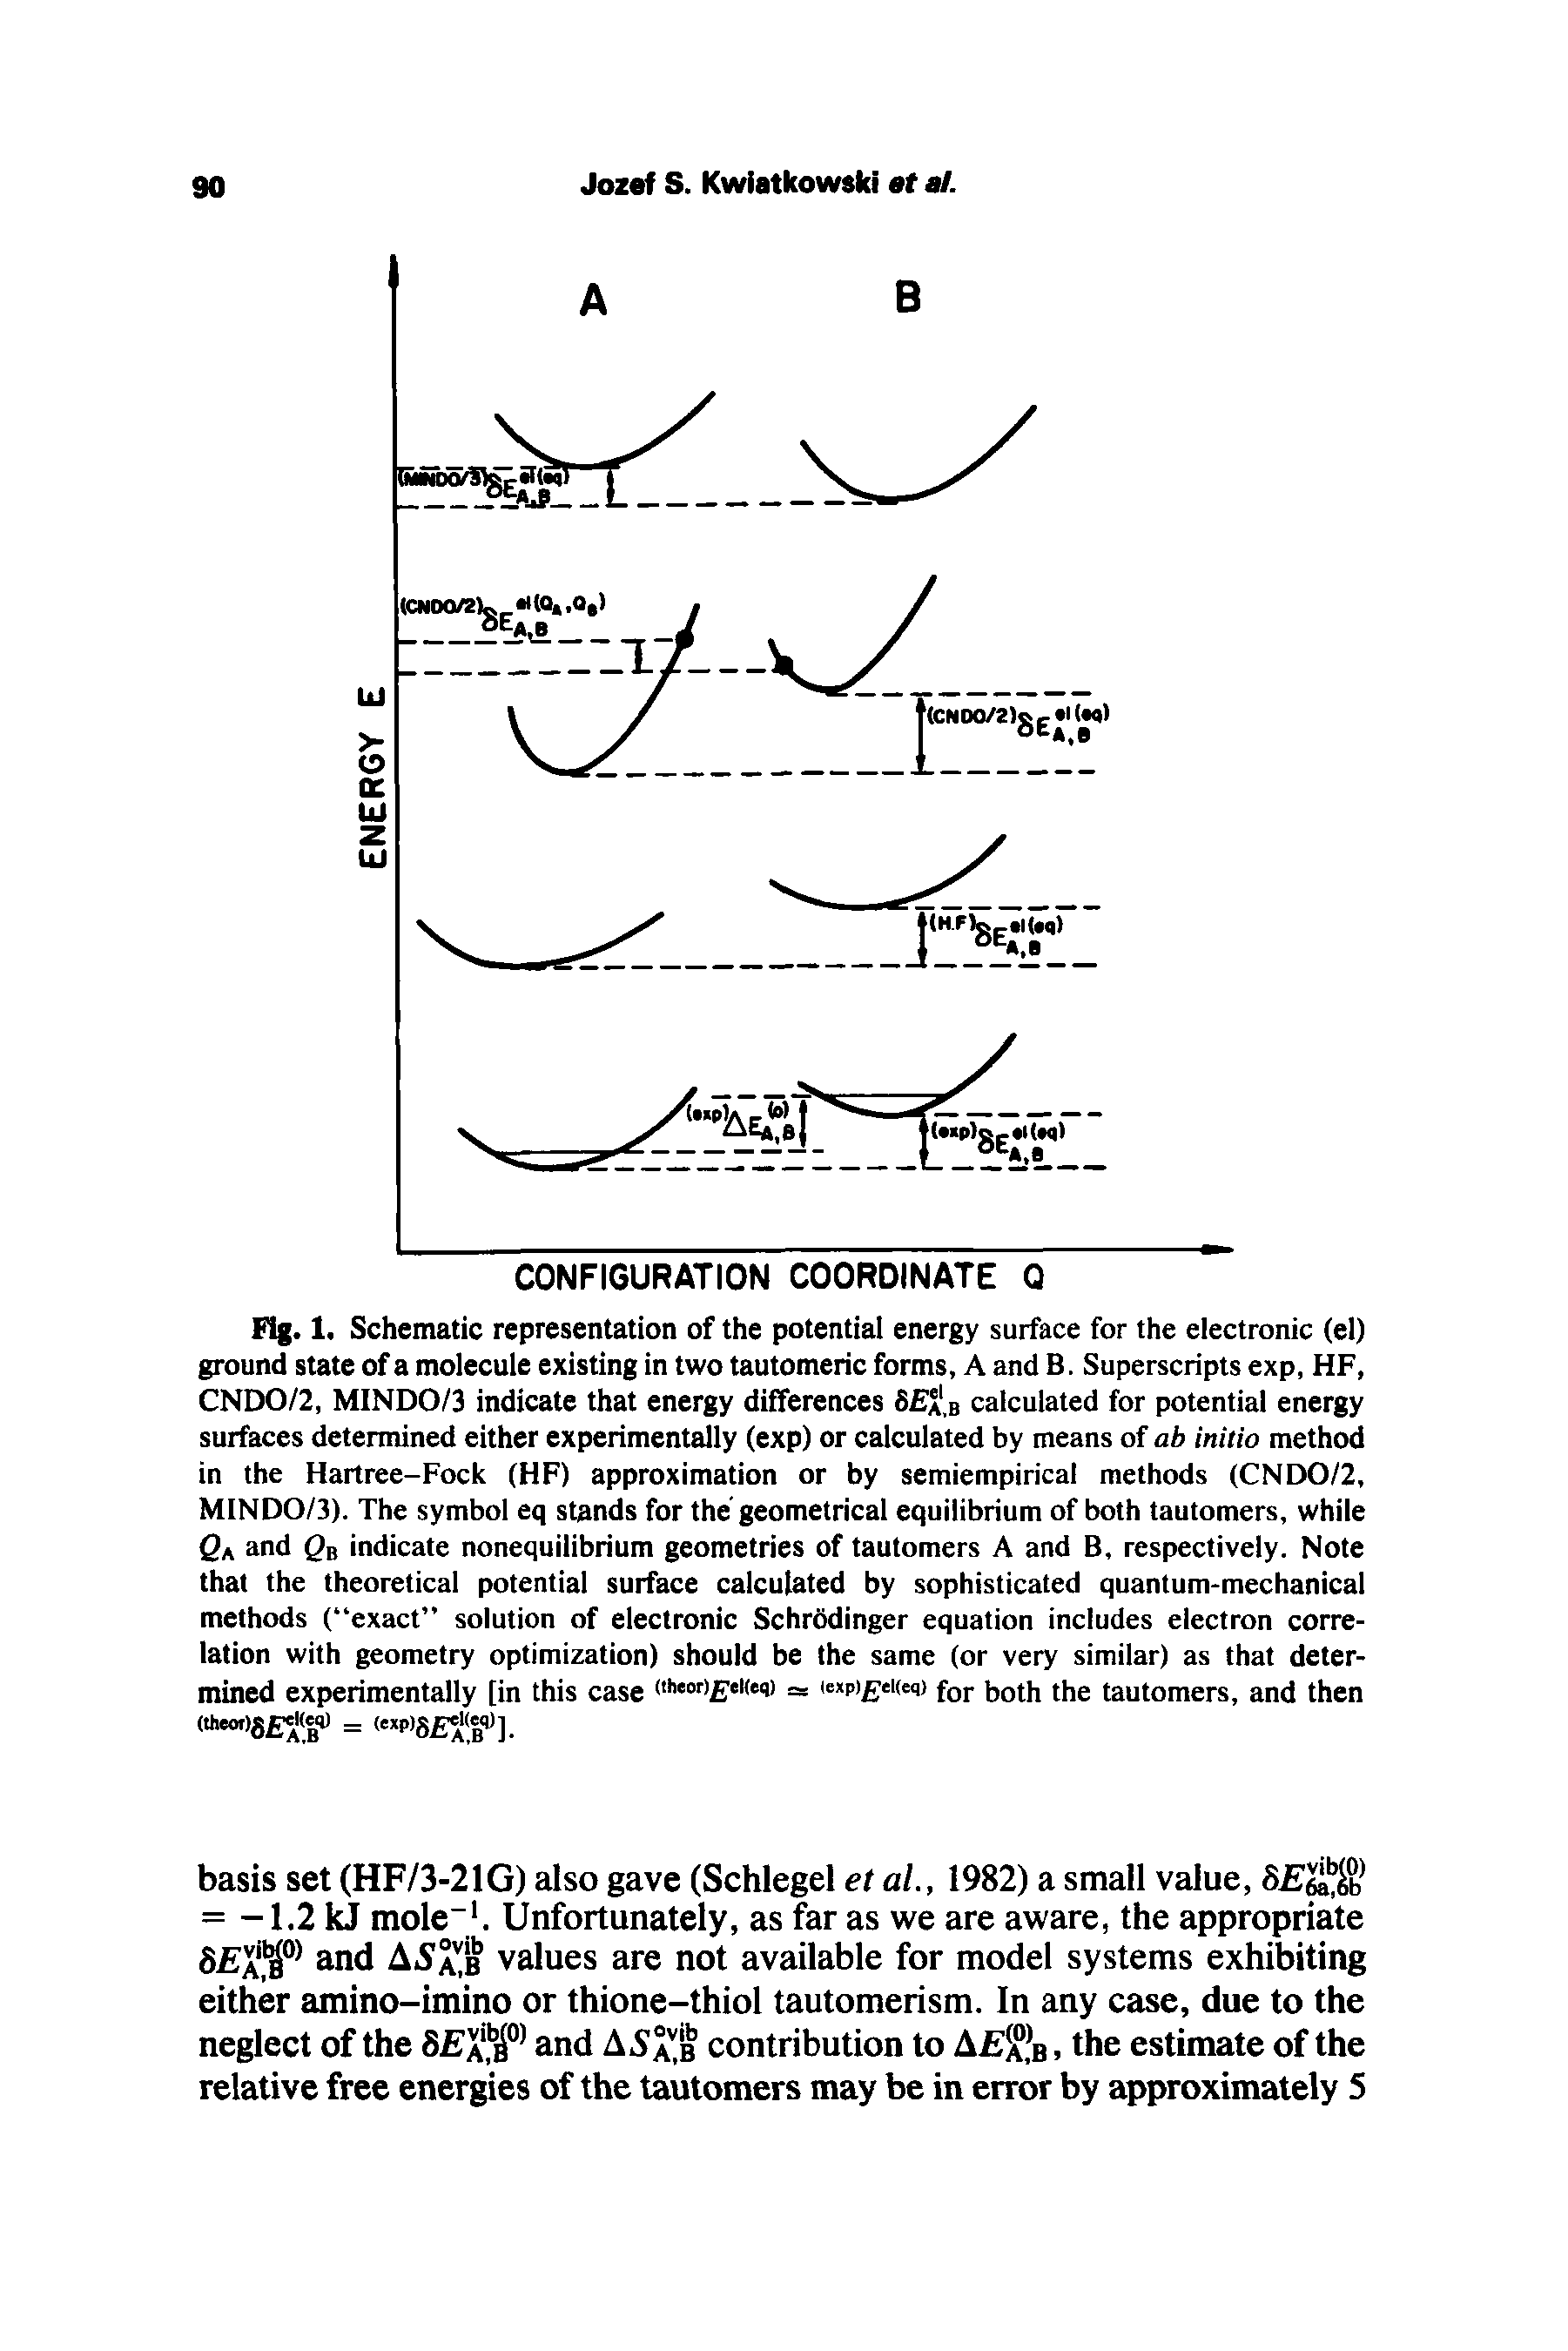 Fig. 1. Schematic representation of the potential energy surface for the electronic (el) ground state of a molecule existing in two tautomeric forms, A and B. Superscripts exp, HF, CNDO/2, MINDO/3 indicate that energy differences 8 a,b calculated for potential energy surfaces determined either experimentally (exp) or calculated by means of ab initio method in the Hartree-Fock (HF) approximation or by semiempirical methods (CNDO/2, MINDO/3). The symbol eq stands for the geometrical equilibrium of both tautomers, while 2a and Qb indicate nonequilibrium geometries of tautomers A and B, respectively. Note that the theoretical potential surface calculated by sophisticated quantum-mechanical methods ( exact solution of electronic Schrbdinger equation includes electron correlation with geometry optimization) should be the same (or very similar) as that determined experimentally [in this case i>eor) ei<eq) = iexP) eKeq) for both the tautomers, and then...